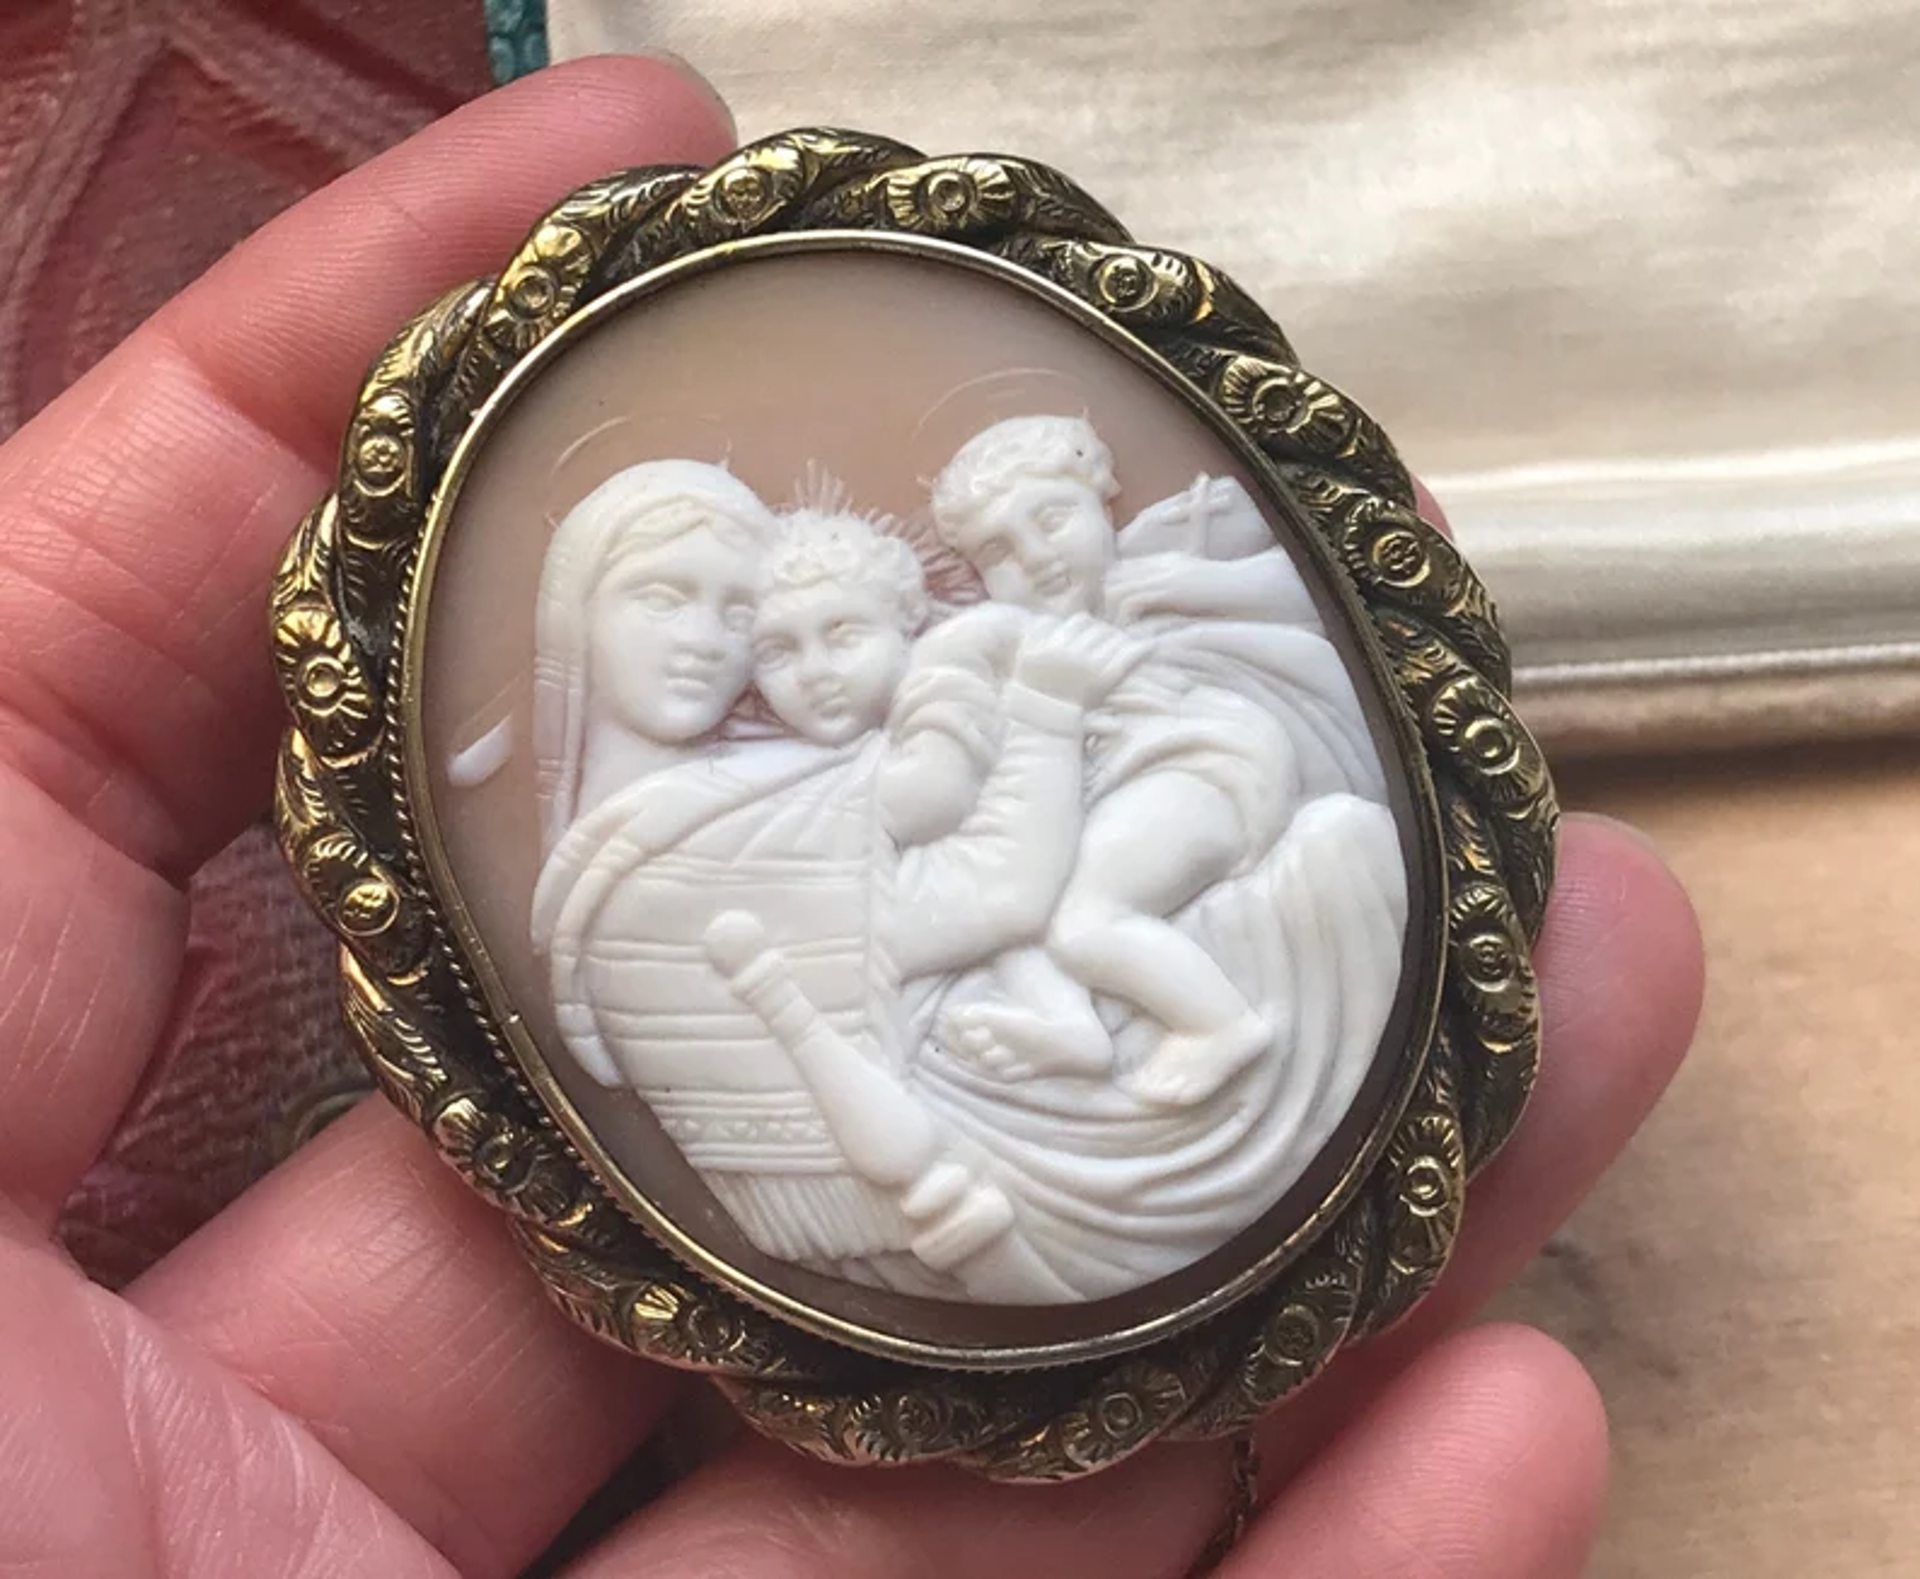 Victorian/Edwardian Italian religious Madonna with child, carved shell cameo brooch/pin by Cameo